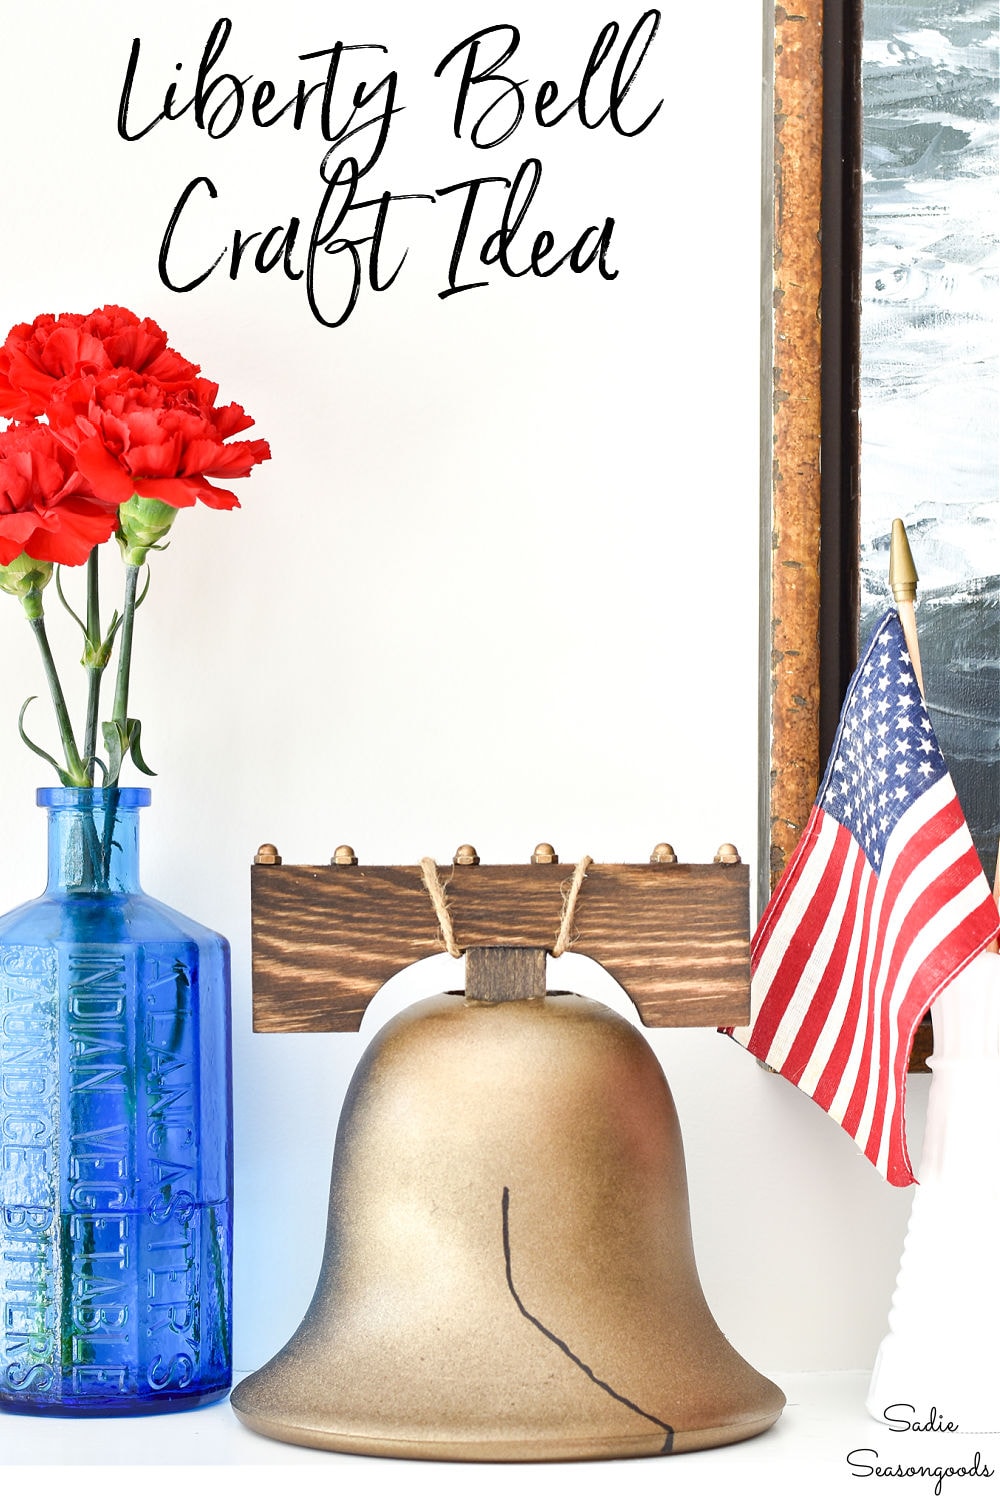 upcycling a glass shade as a patriotic bell